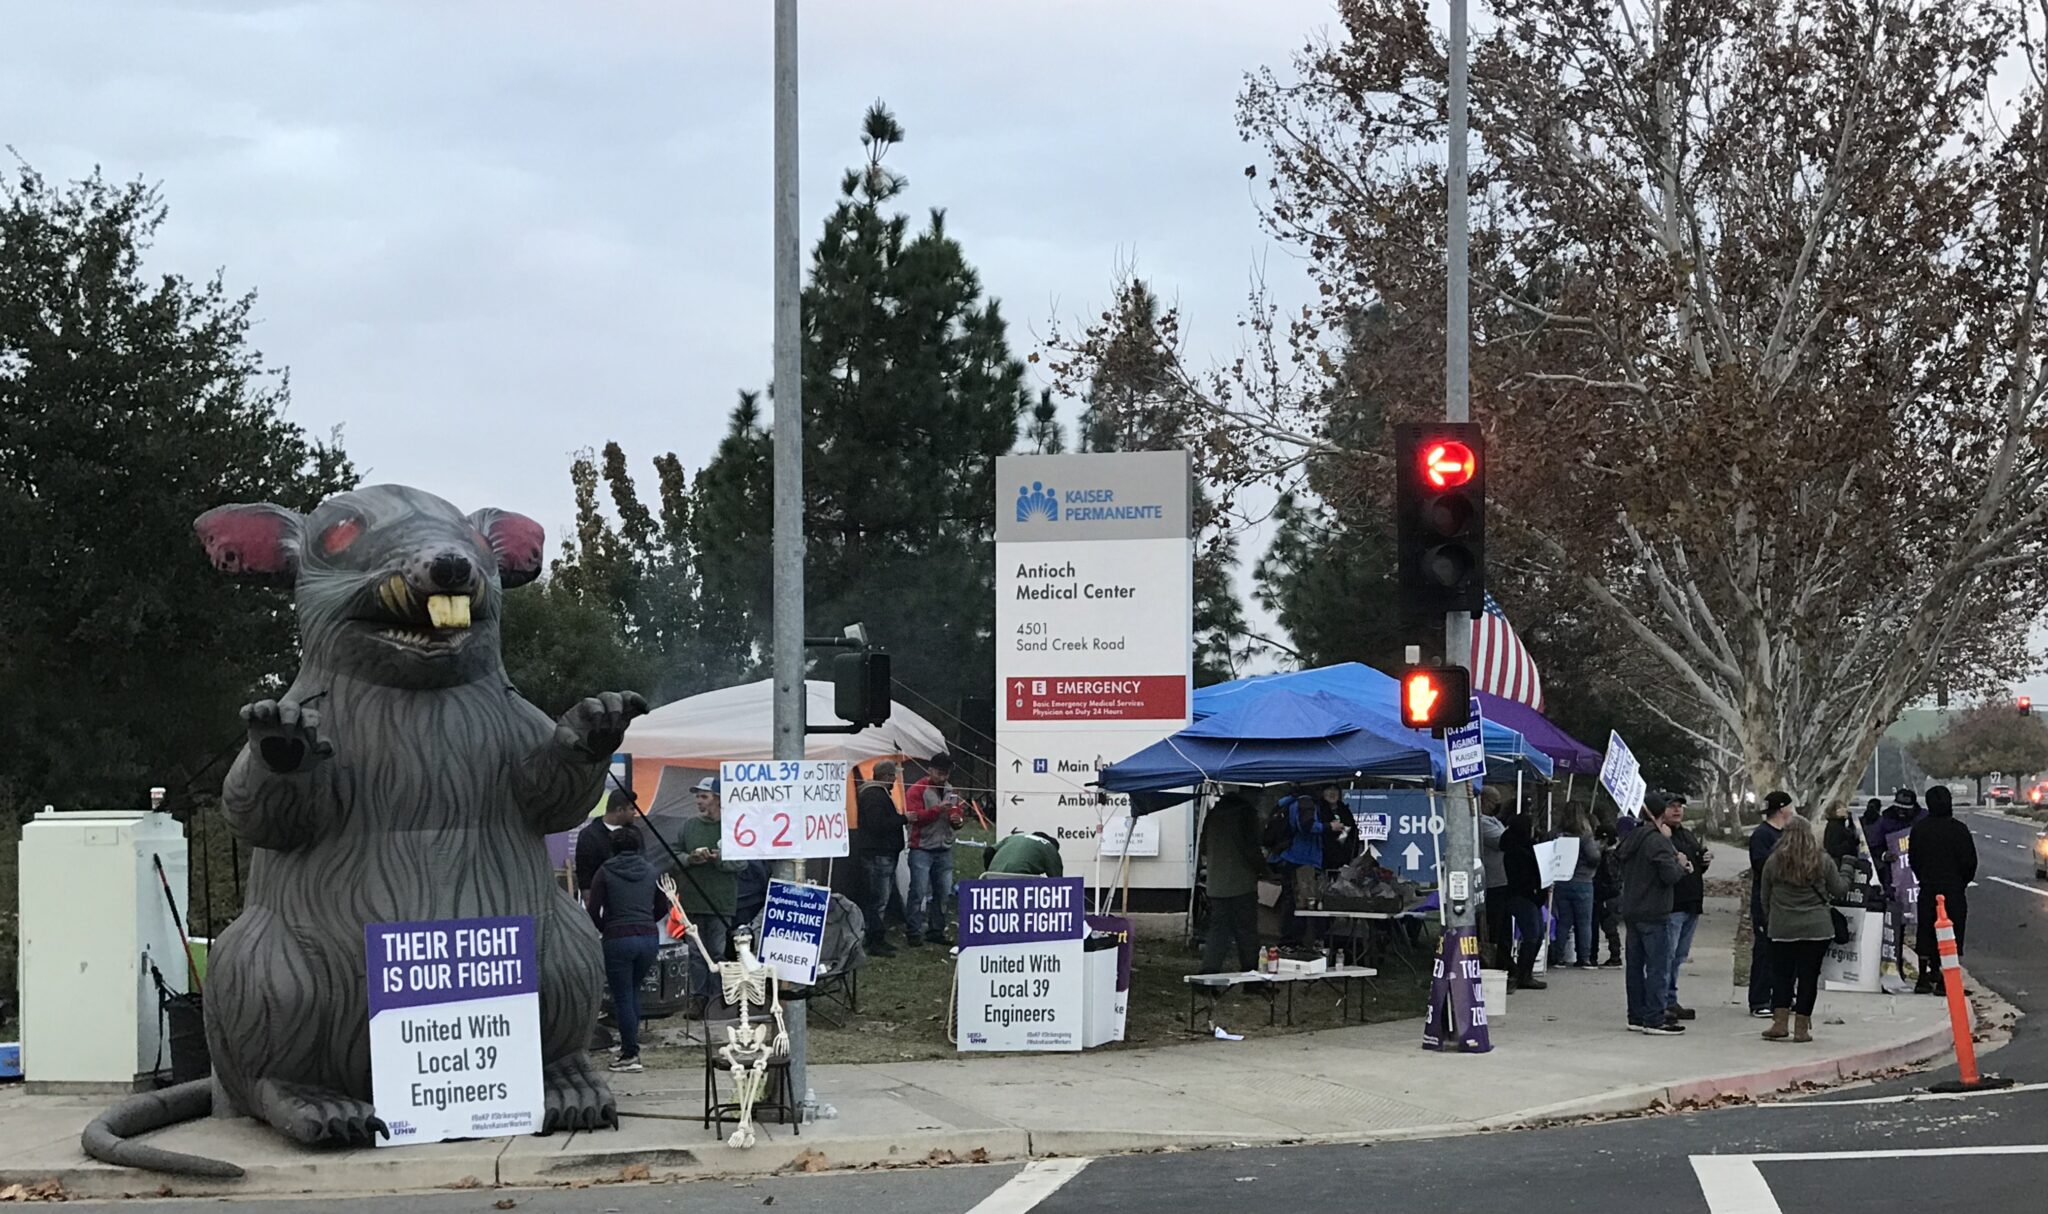 Kaiser claims bargaining in good faith with striking engineers’ union